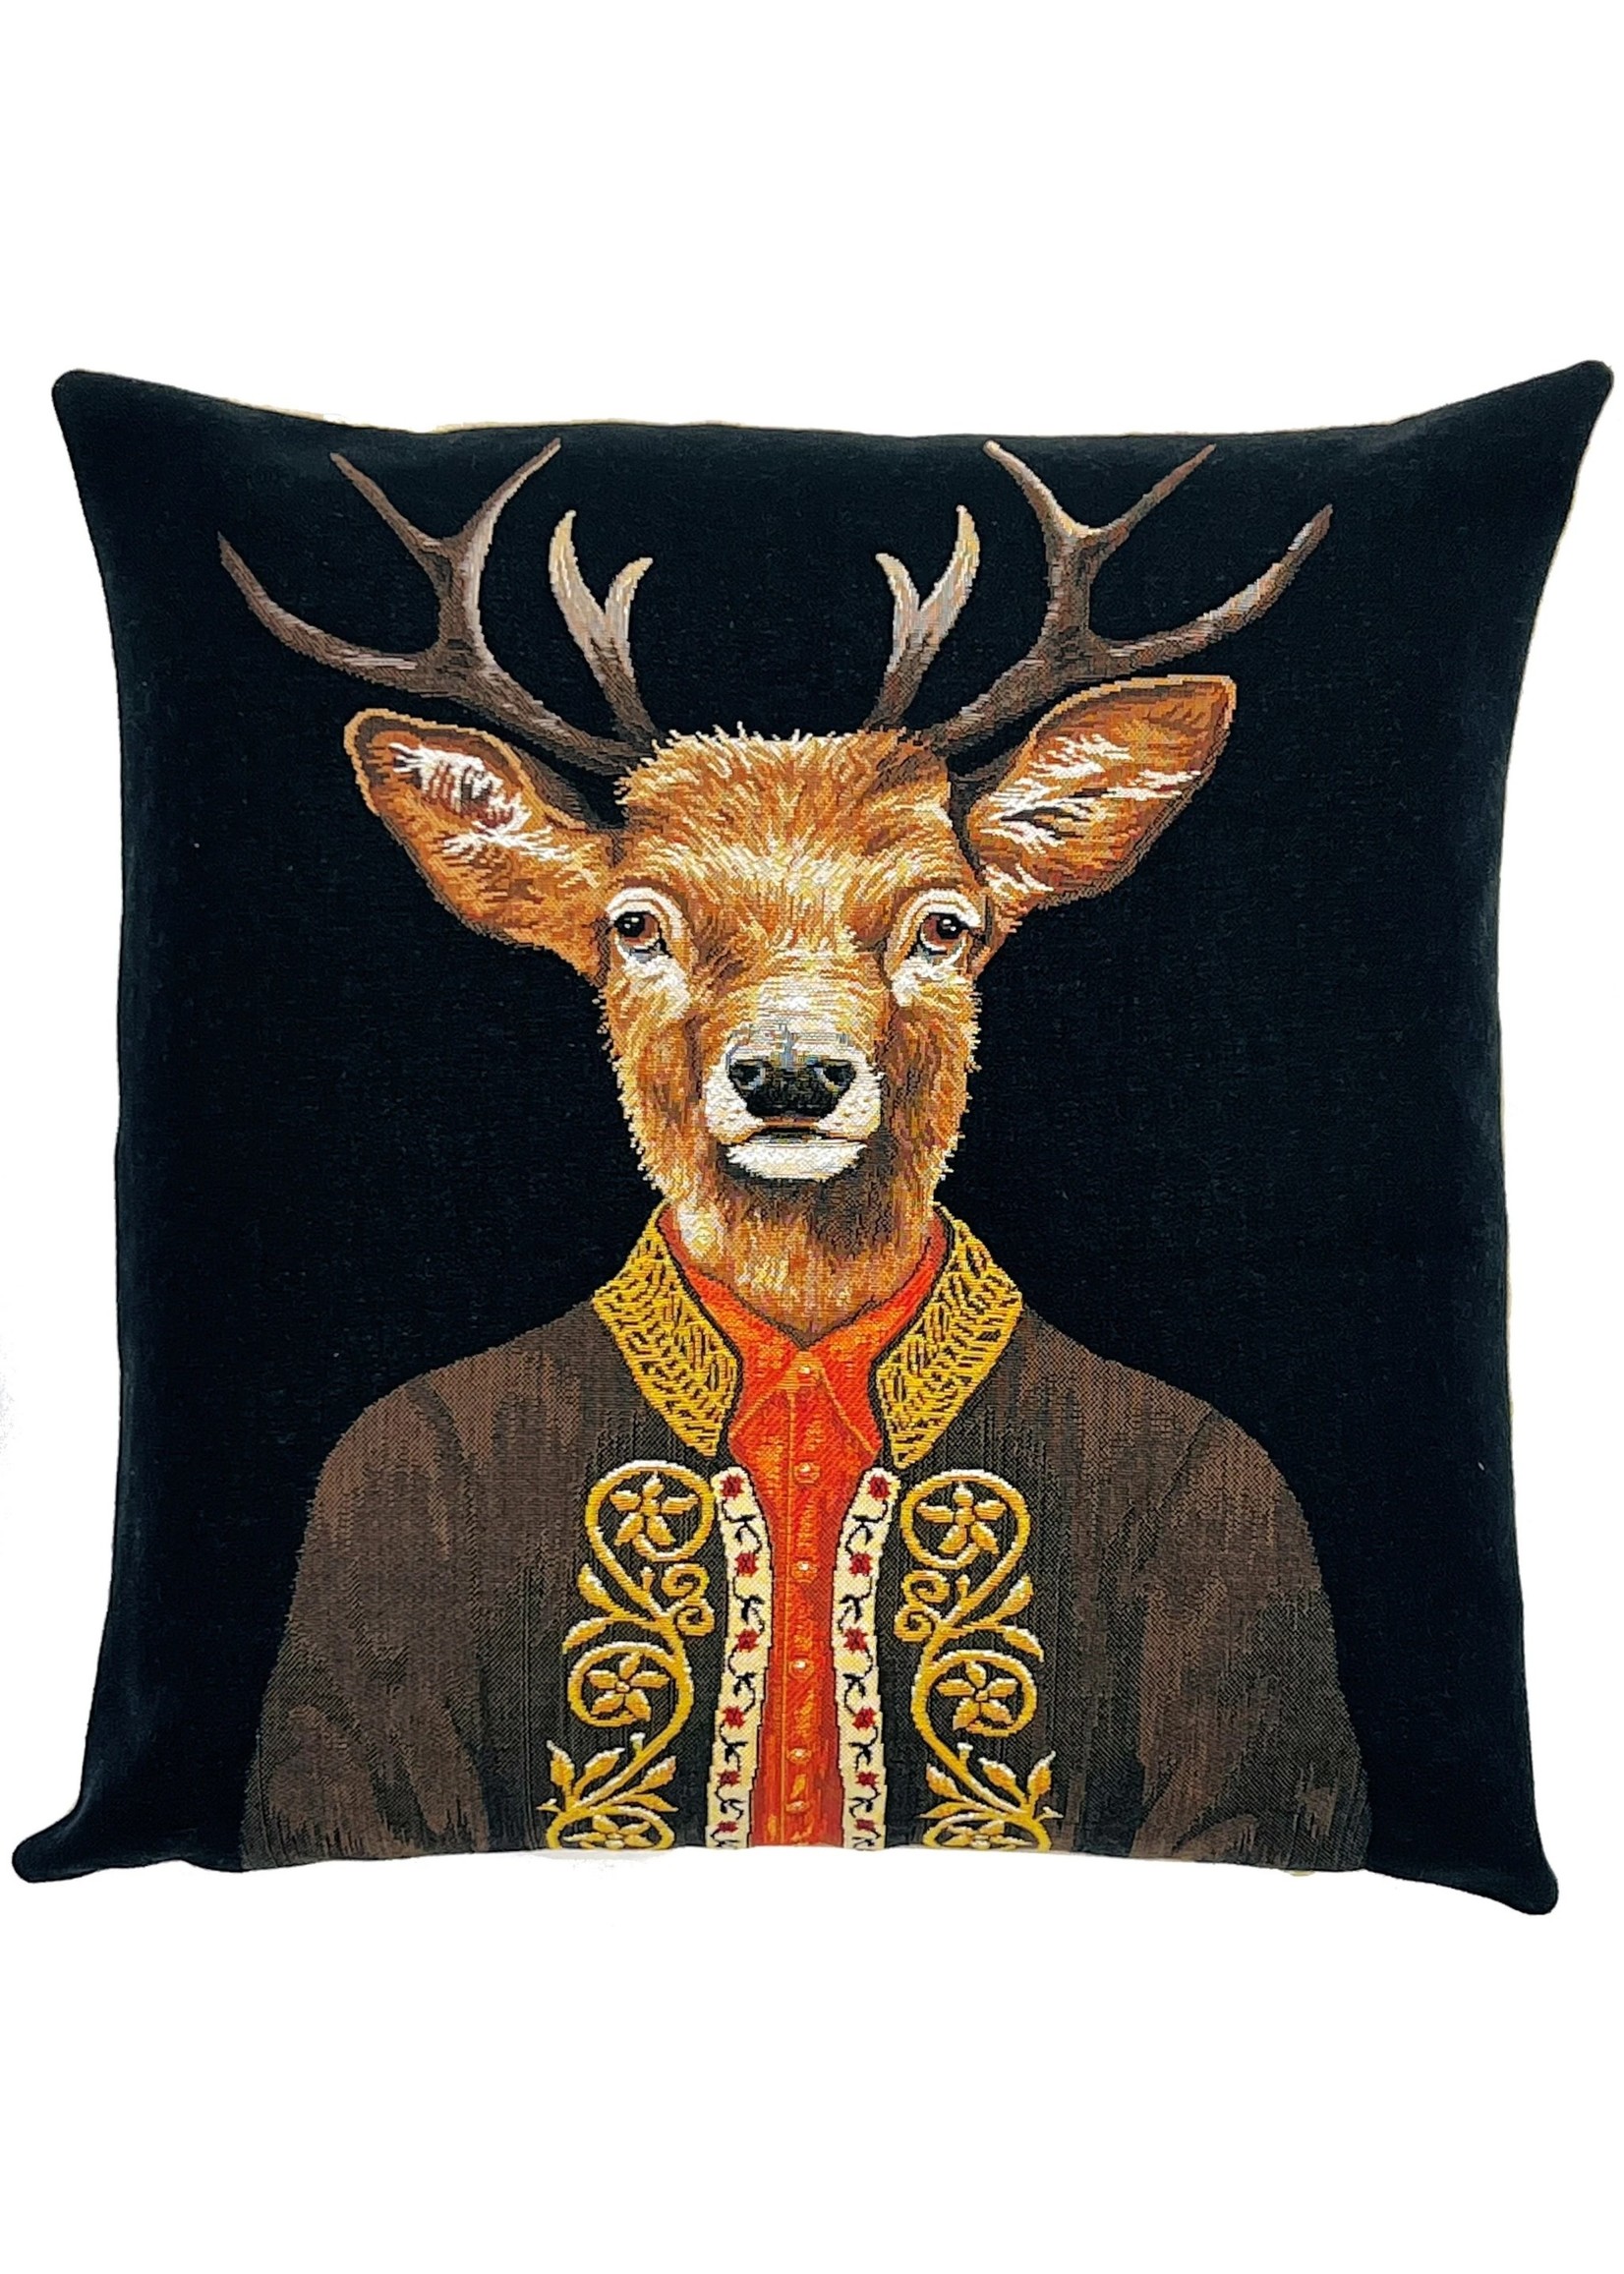 Pillow with Insert - Dressed Stag (black)